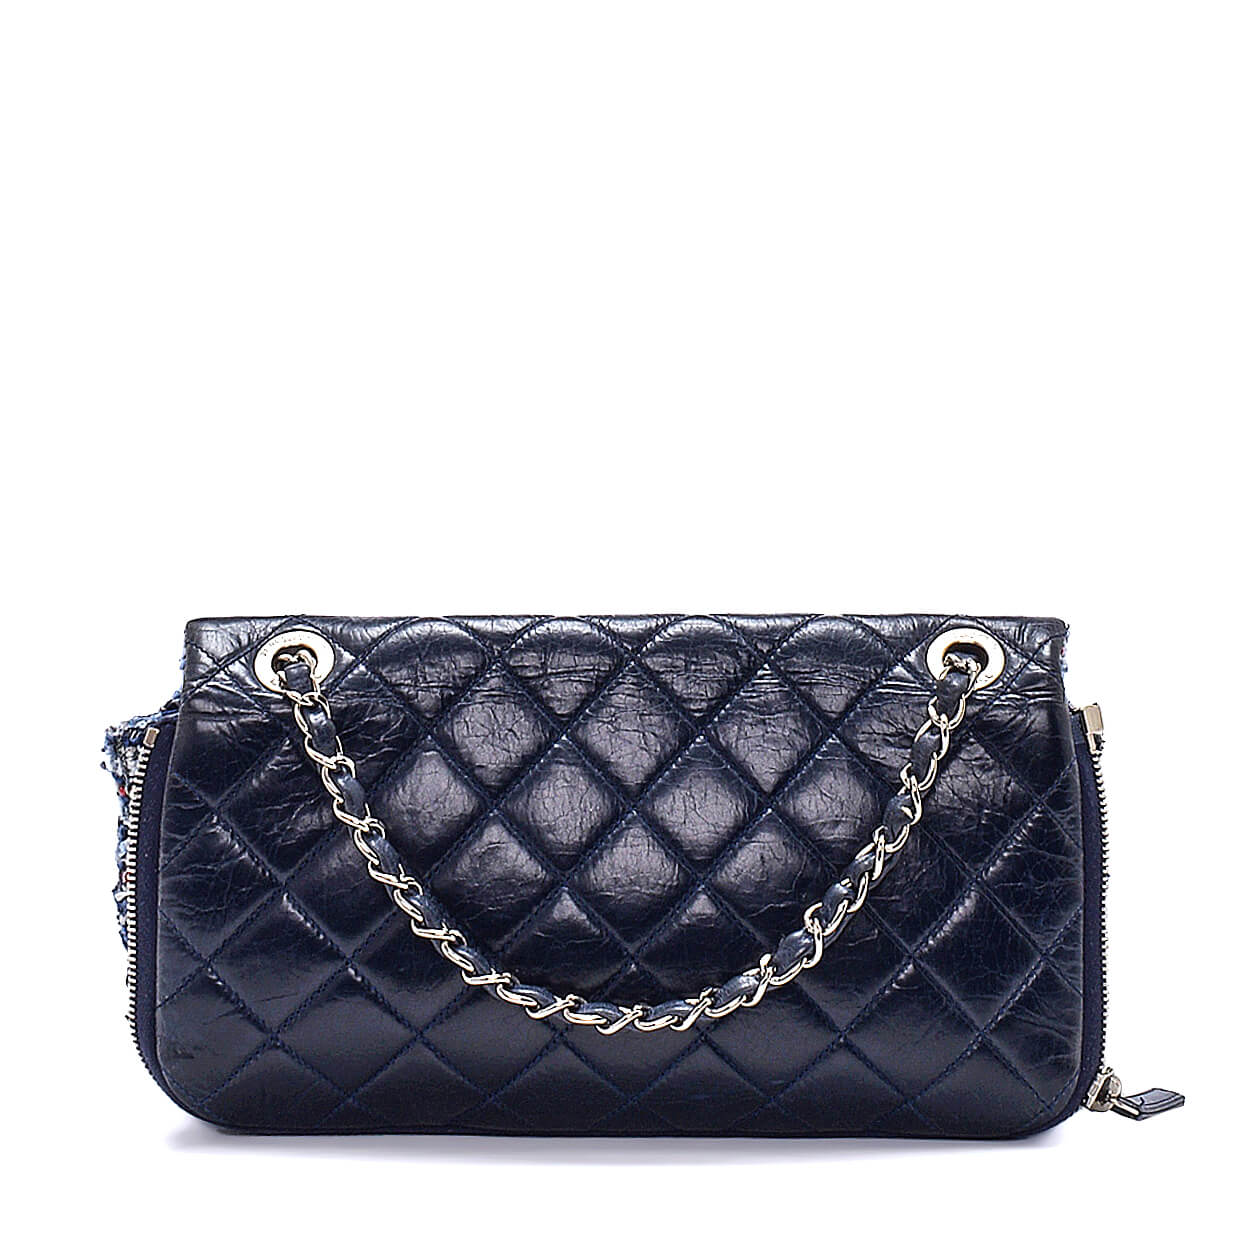 Chanel - Navy Blue Quilted Leather & Tweed Classic Single Flap Bag